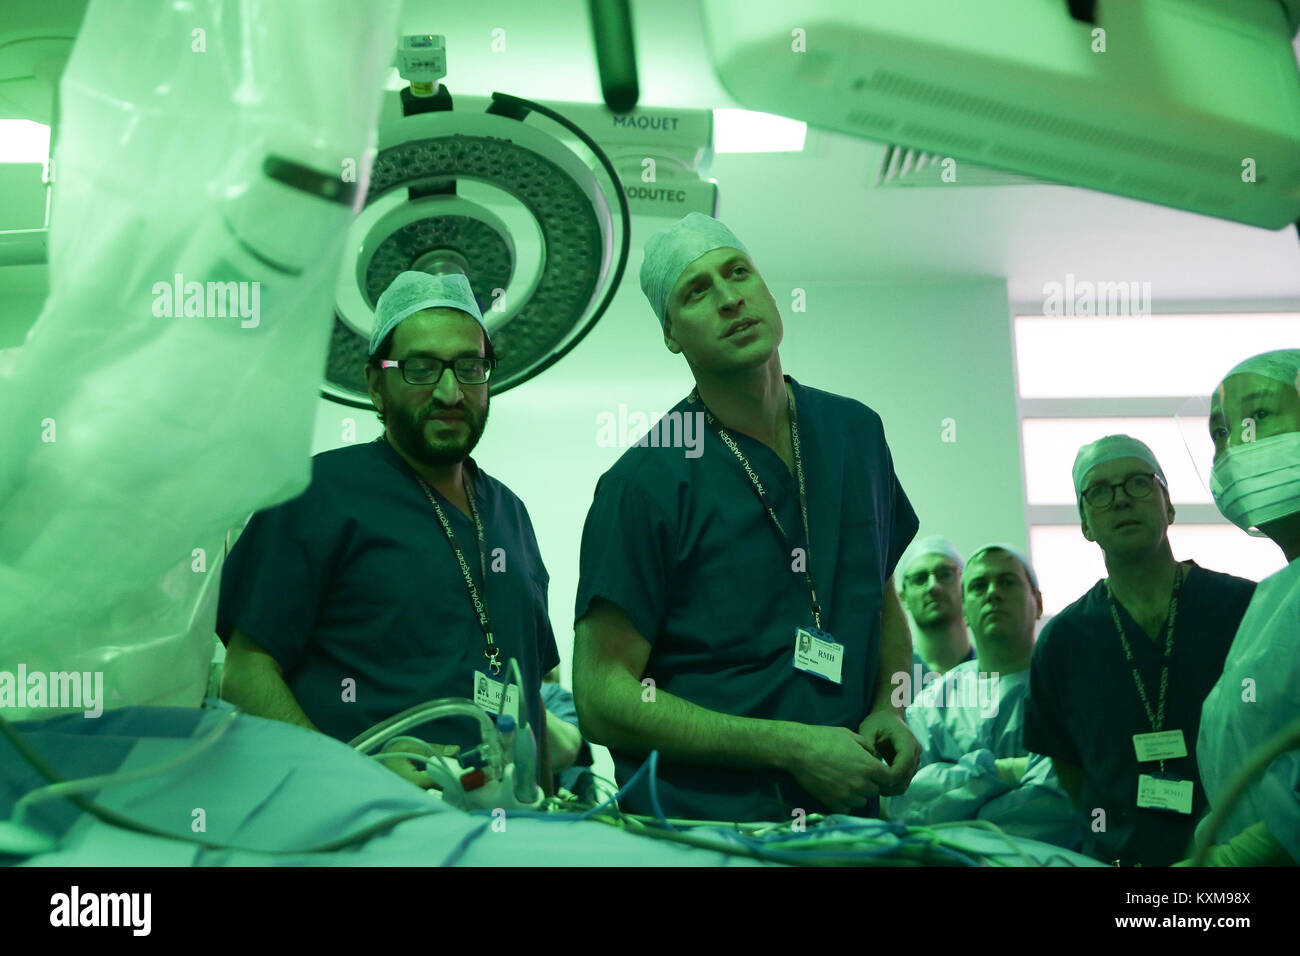 The Duke of Cambridge and lead surgeon Asif Chaudry (left) stand in front of a da Vinci XI machine prior to a highly complex robotic cancer operation to remove a tumour of the oesophagus at the junction between the heart, lungs and aorta of patient Charles Ludlow, 63, during his visit to the Royal Marsden NHS Foundation Trust in London. Stock Photo